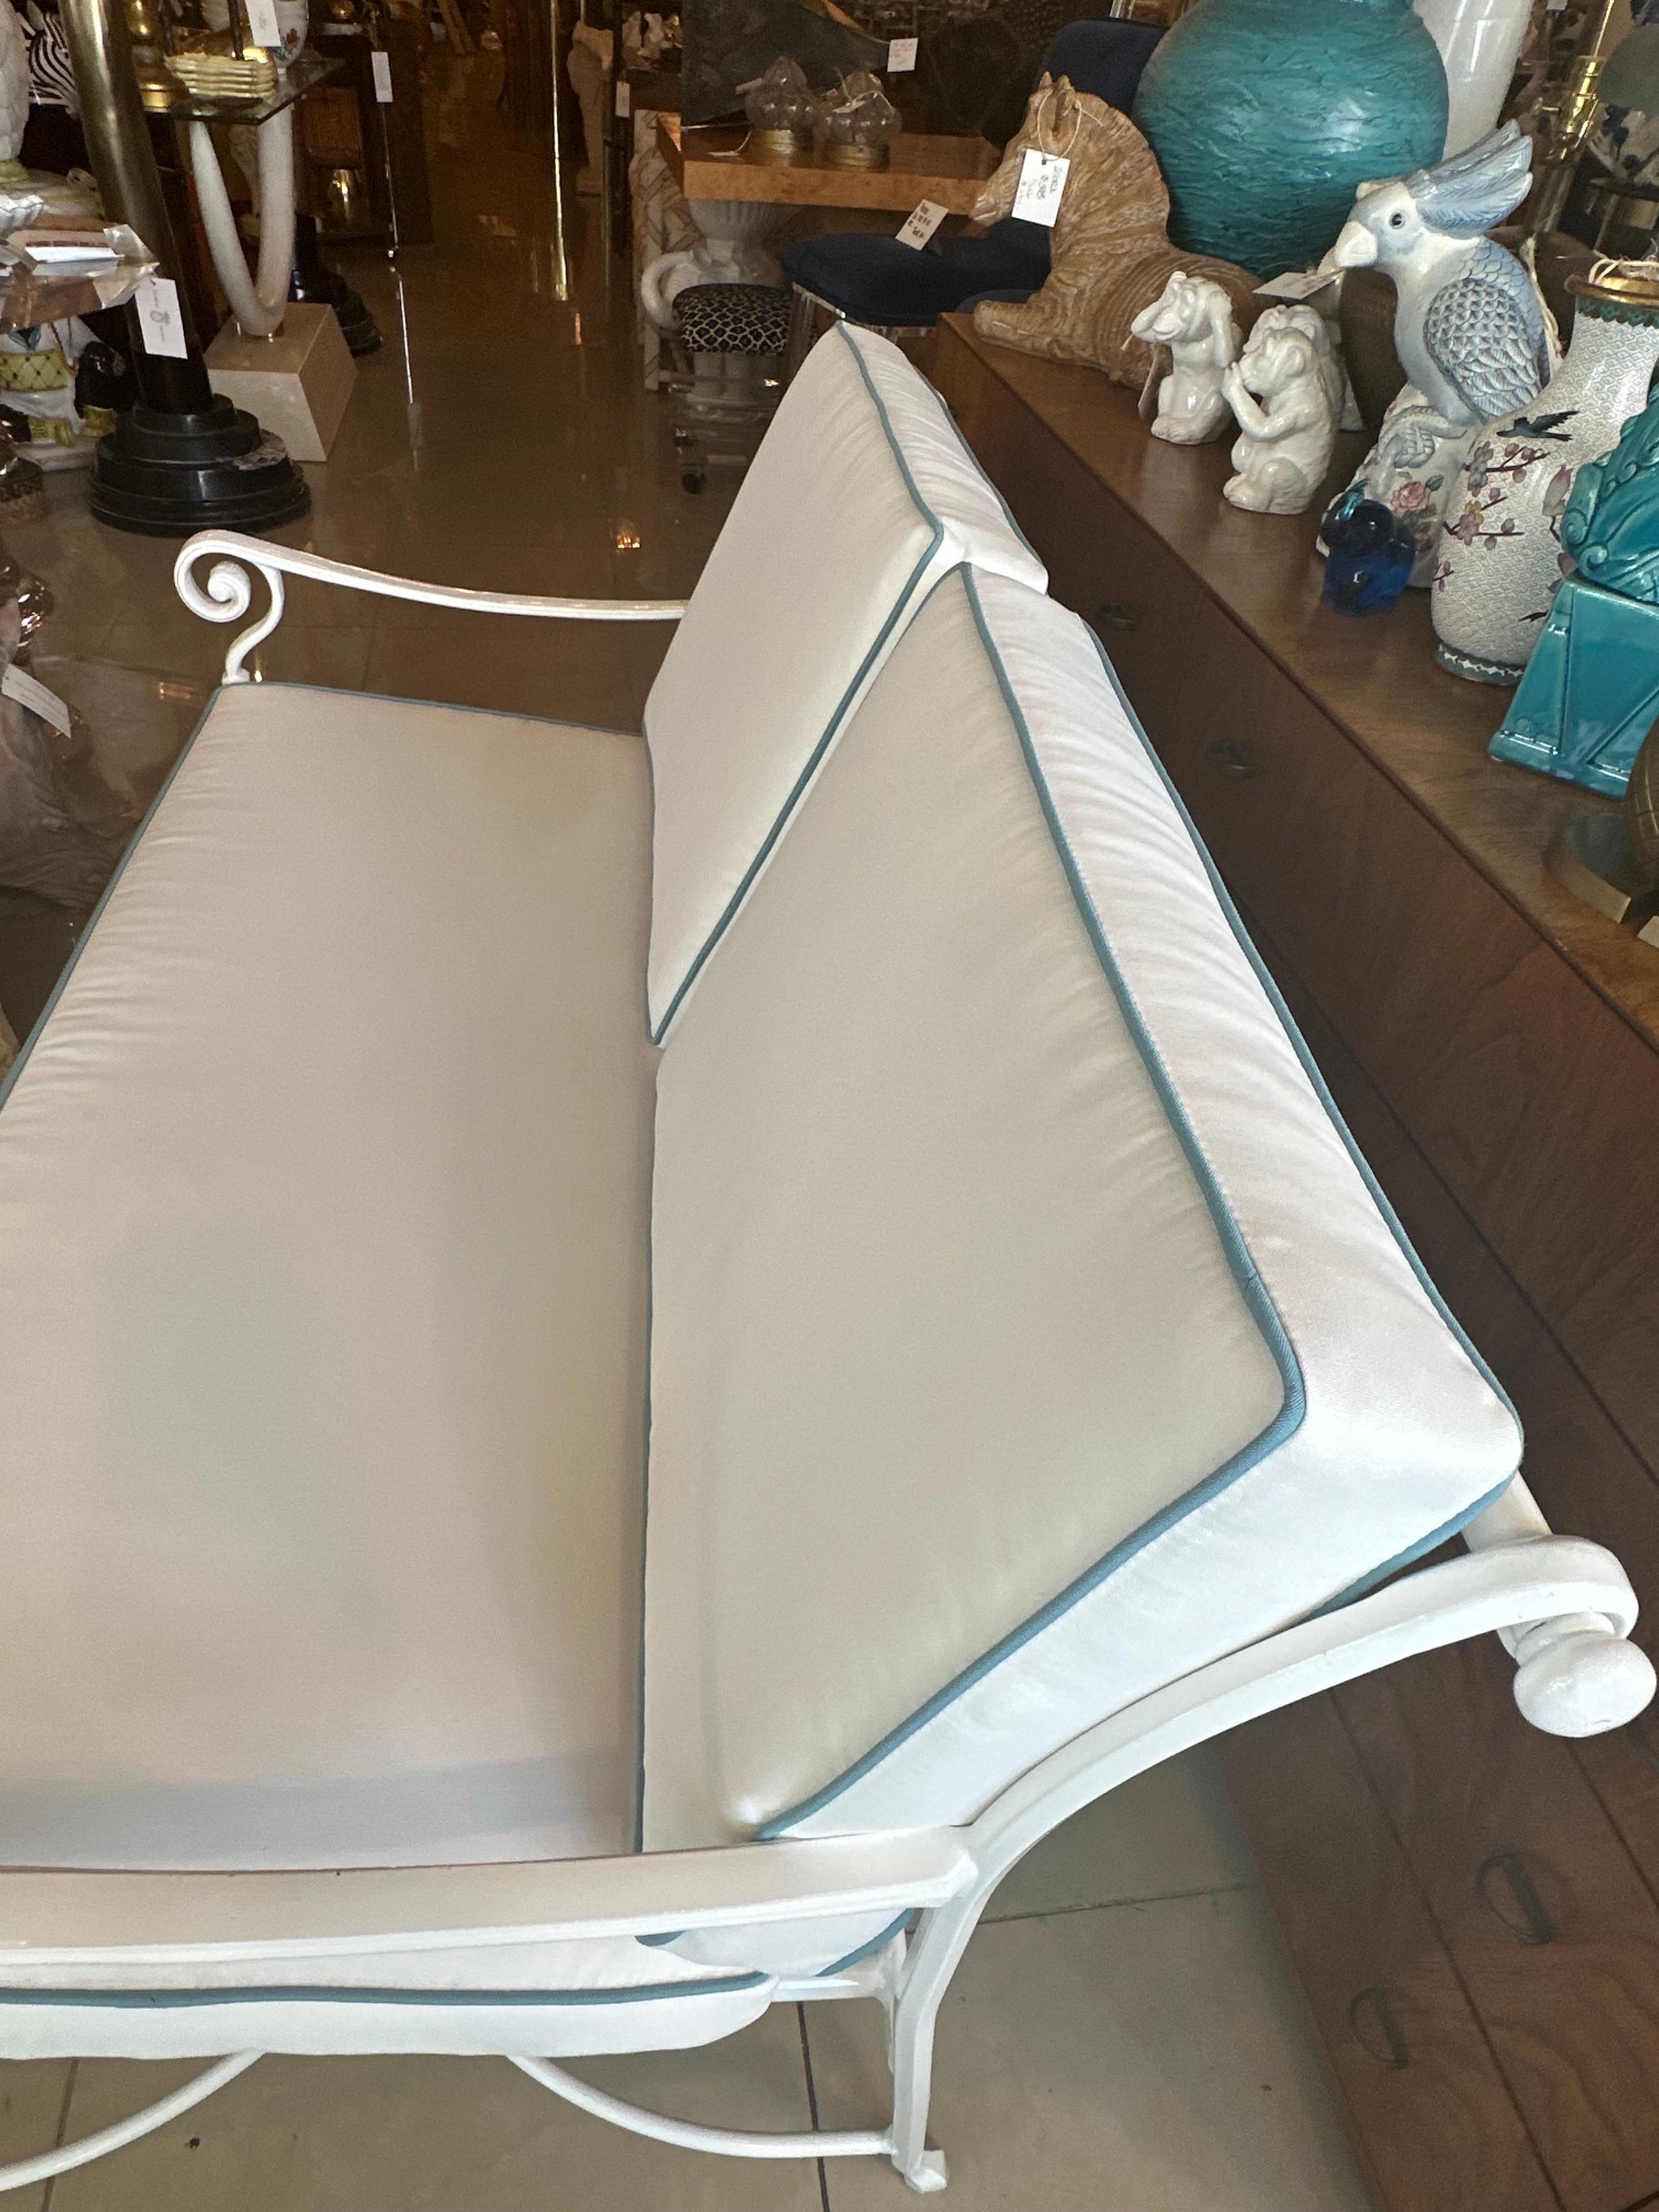 Beautiful vintage metal loveseat sofa for your patio outdoor sunroom. This has been completely restored! Newly powder-coated in a fresh white. All new custom cushions including new foam, zippers, Sunbrella white outdoor fabric with Sunbrella blue